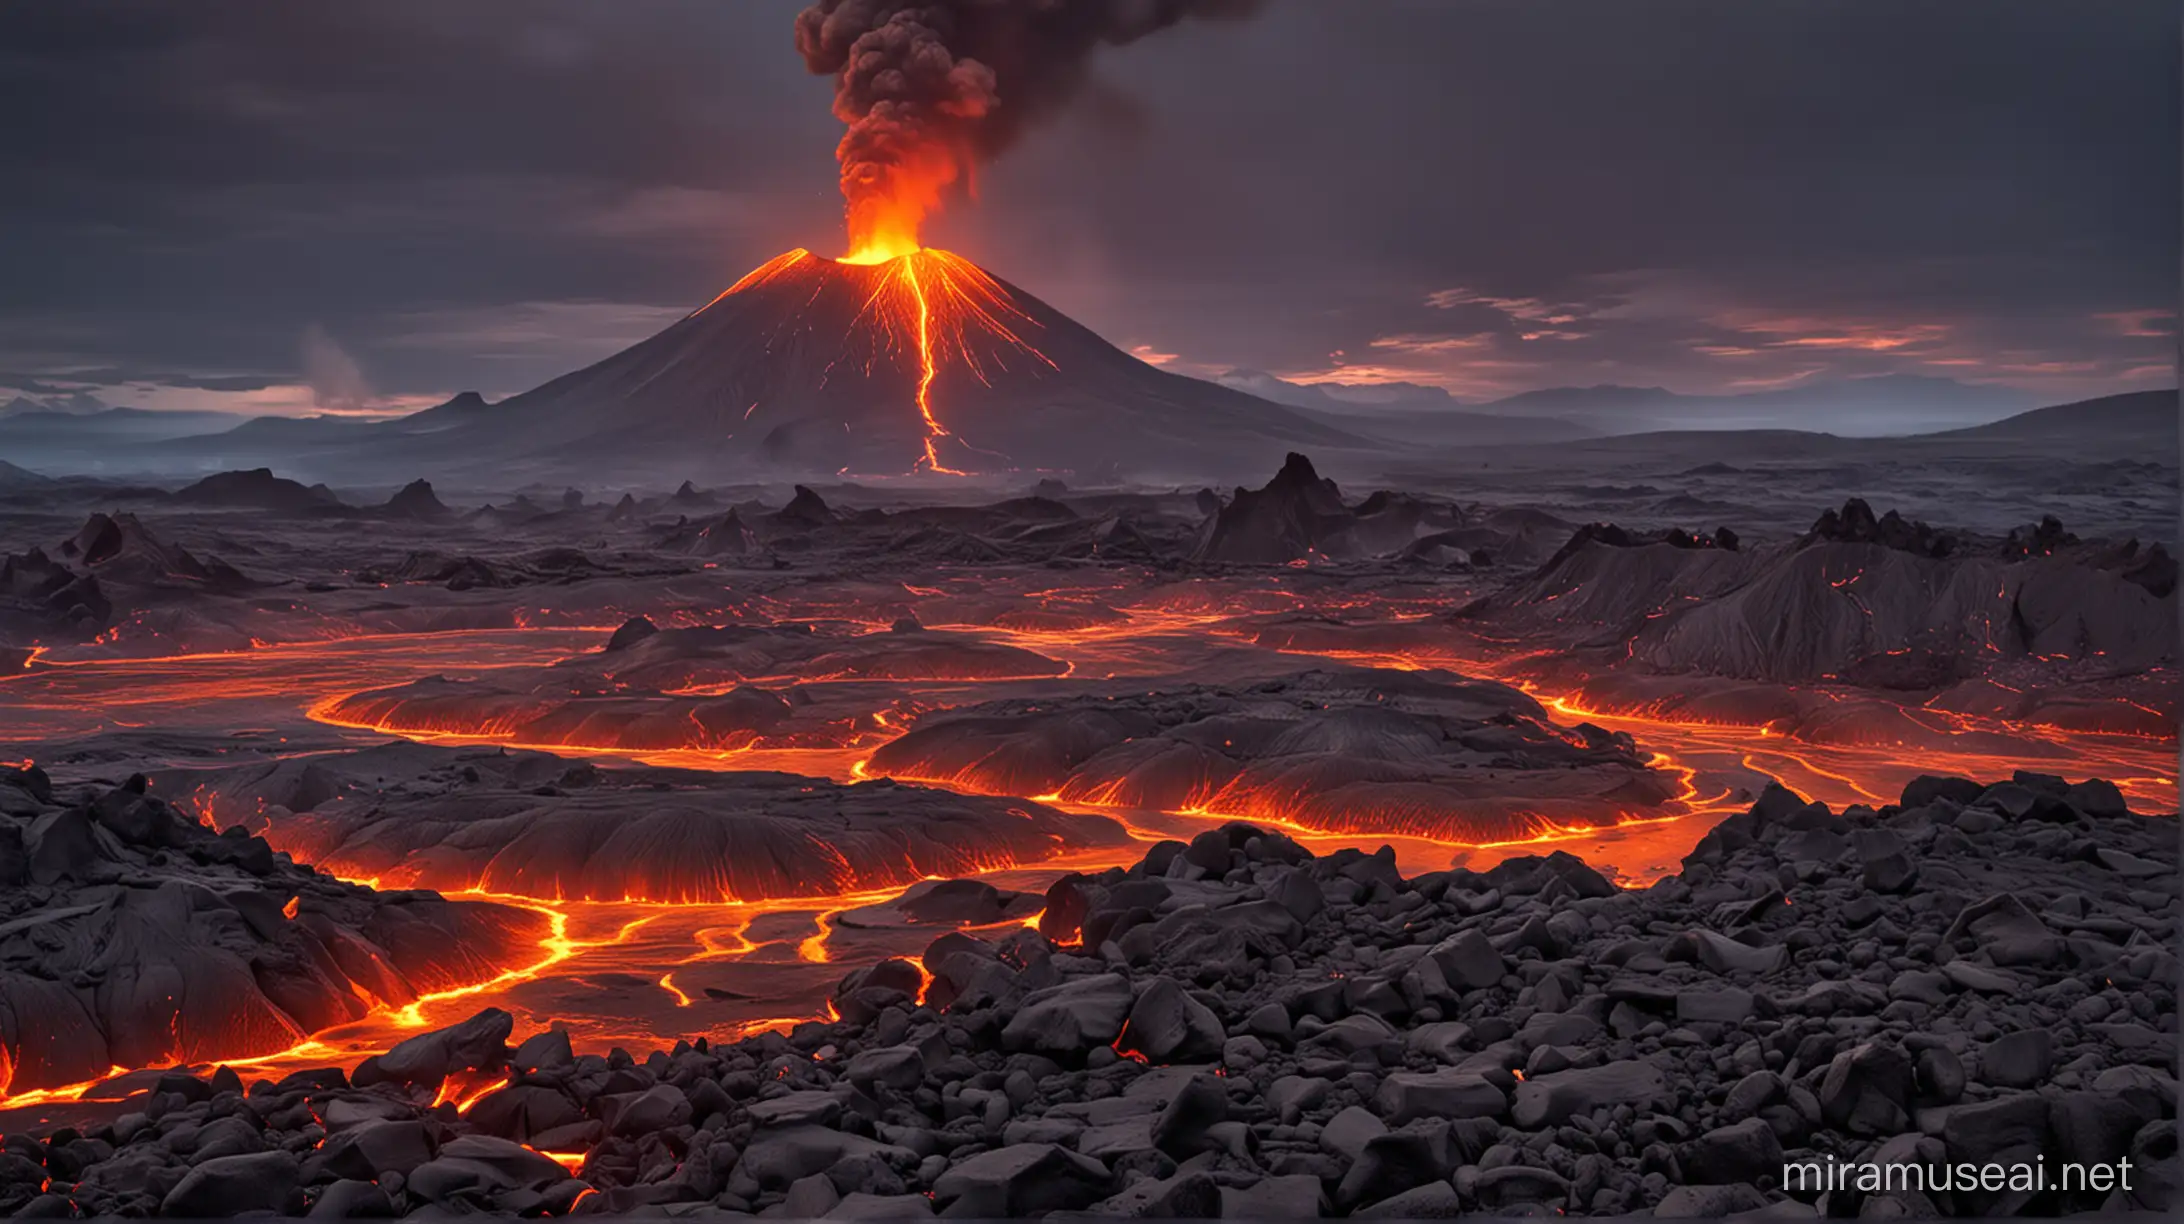 Erupting Volcano with Fiery Lava Flowing in Iceland